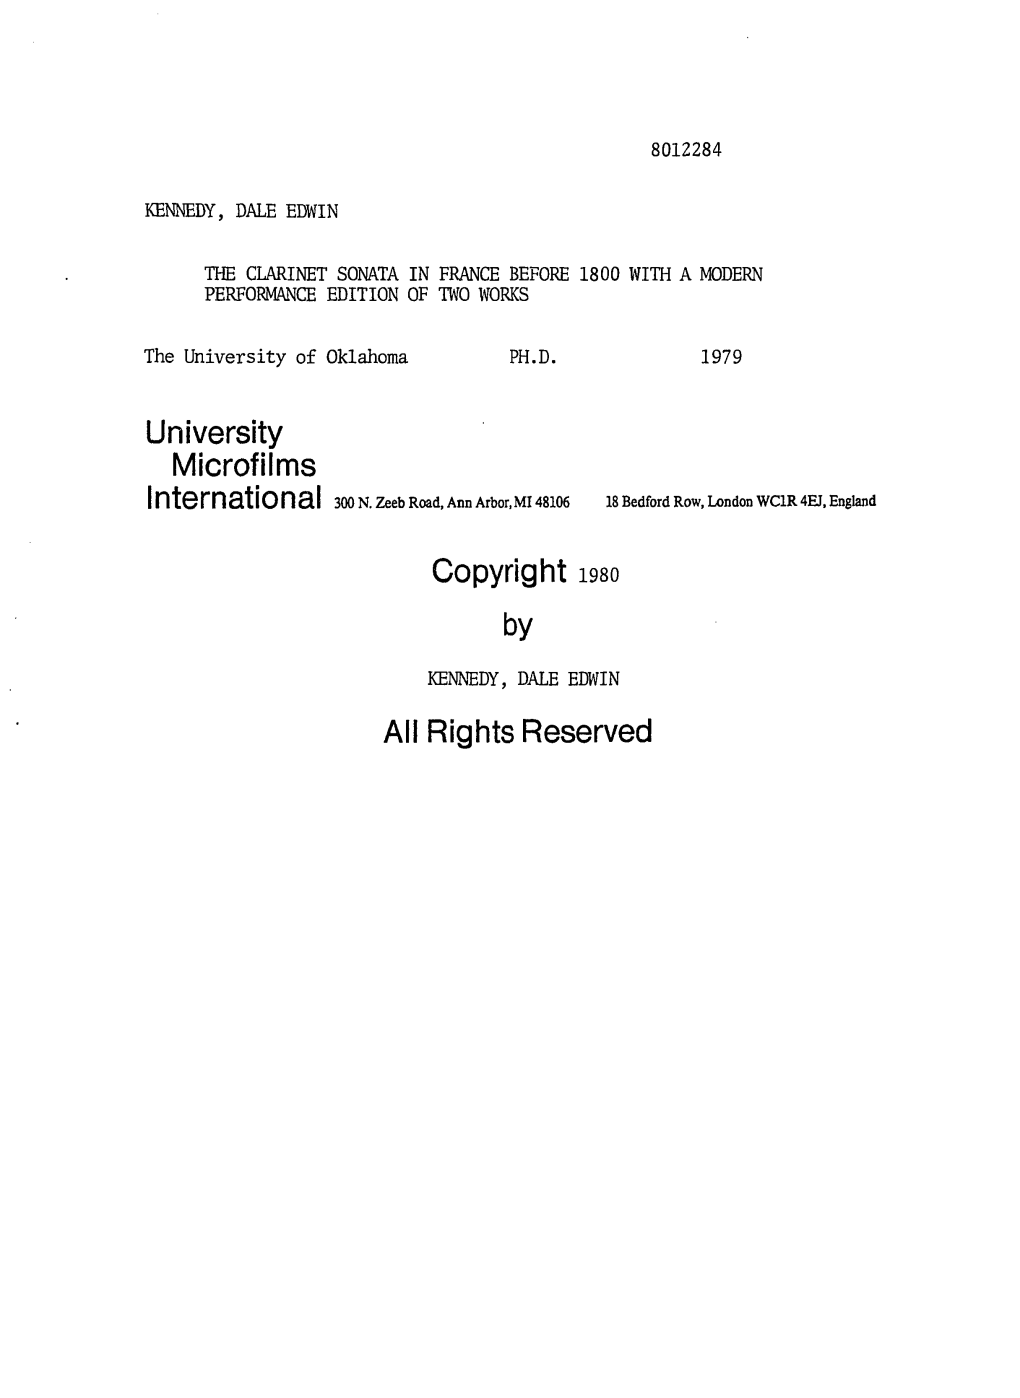 University Microfilms Copyright I98o by All Rights Reserved